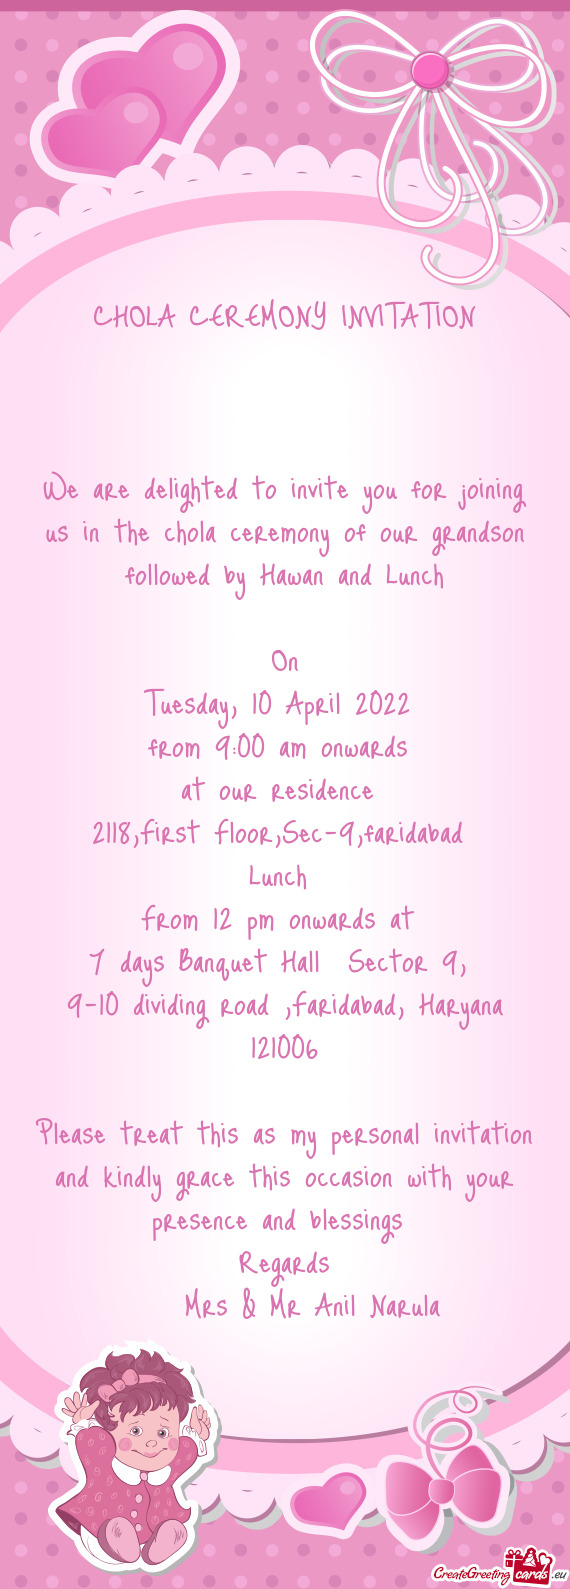 We are delighted to invite you for joining us in the chola ceremony of our grandson followed by Hawa